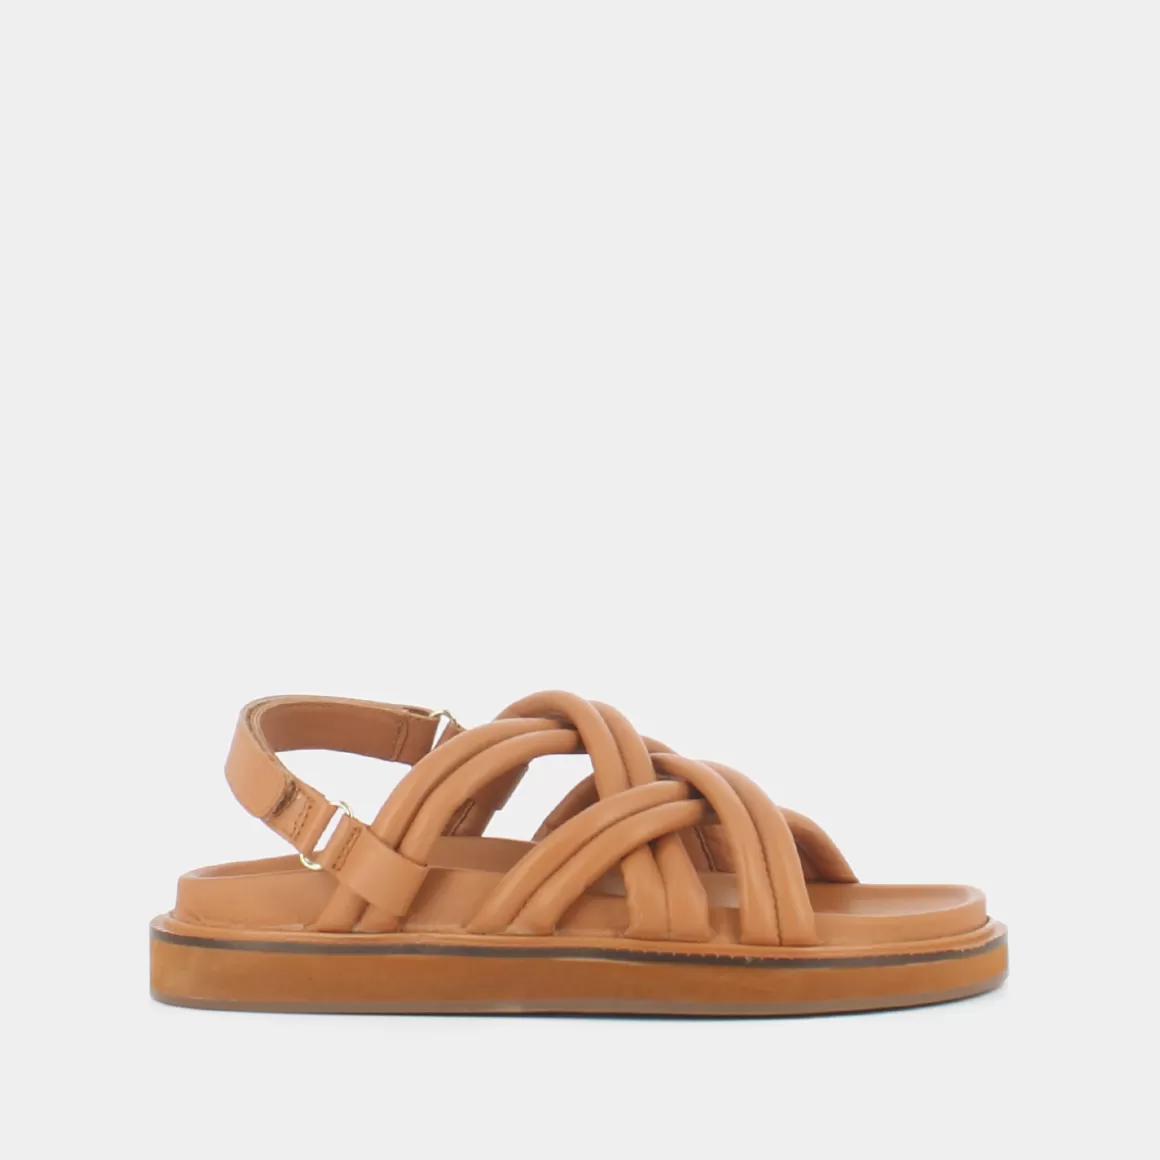 Sandals with braided straps<Jonak Sale